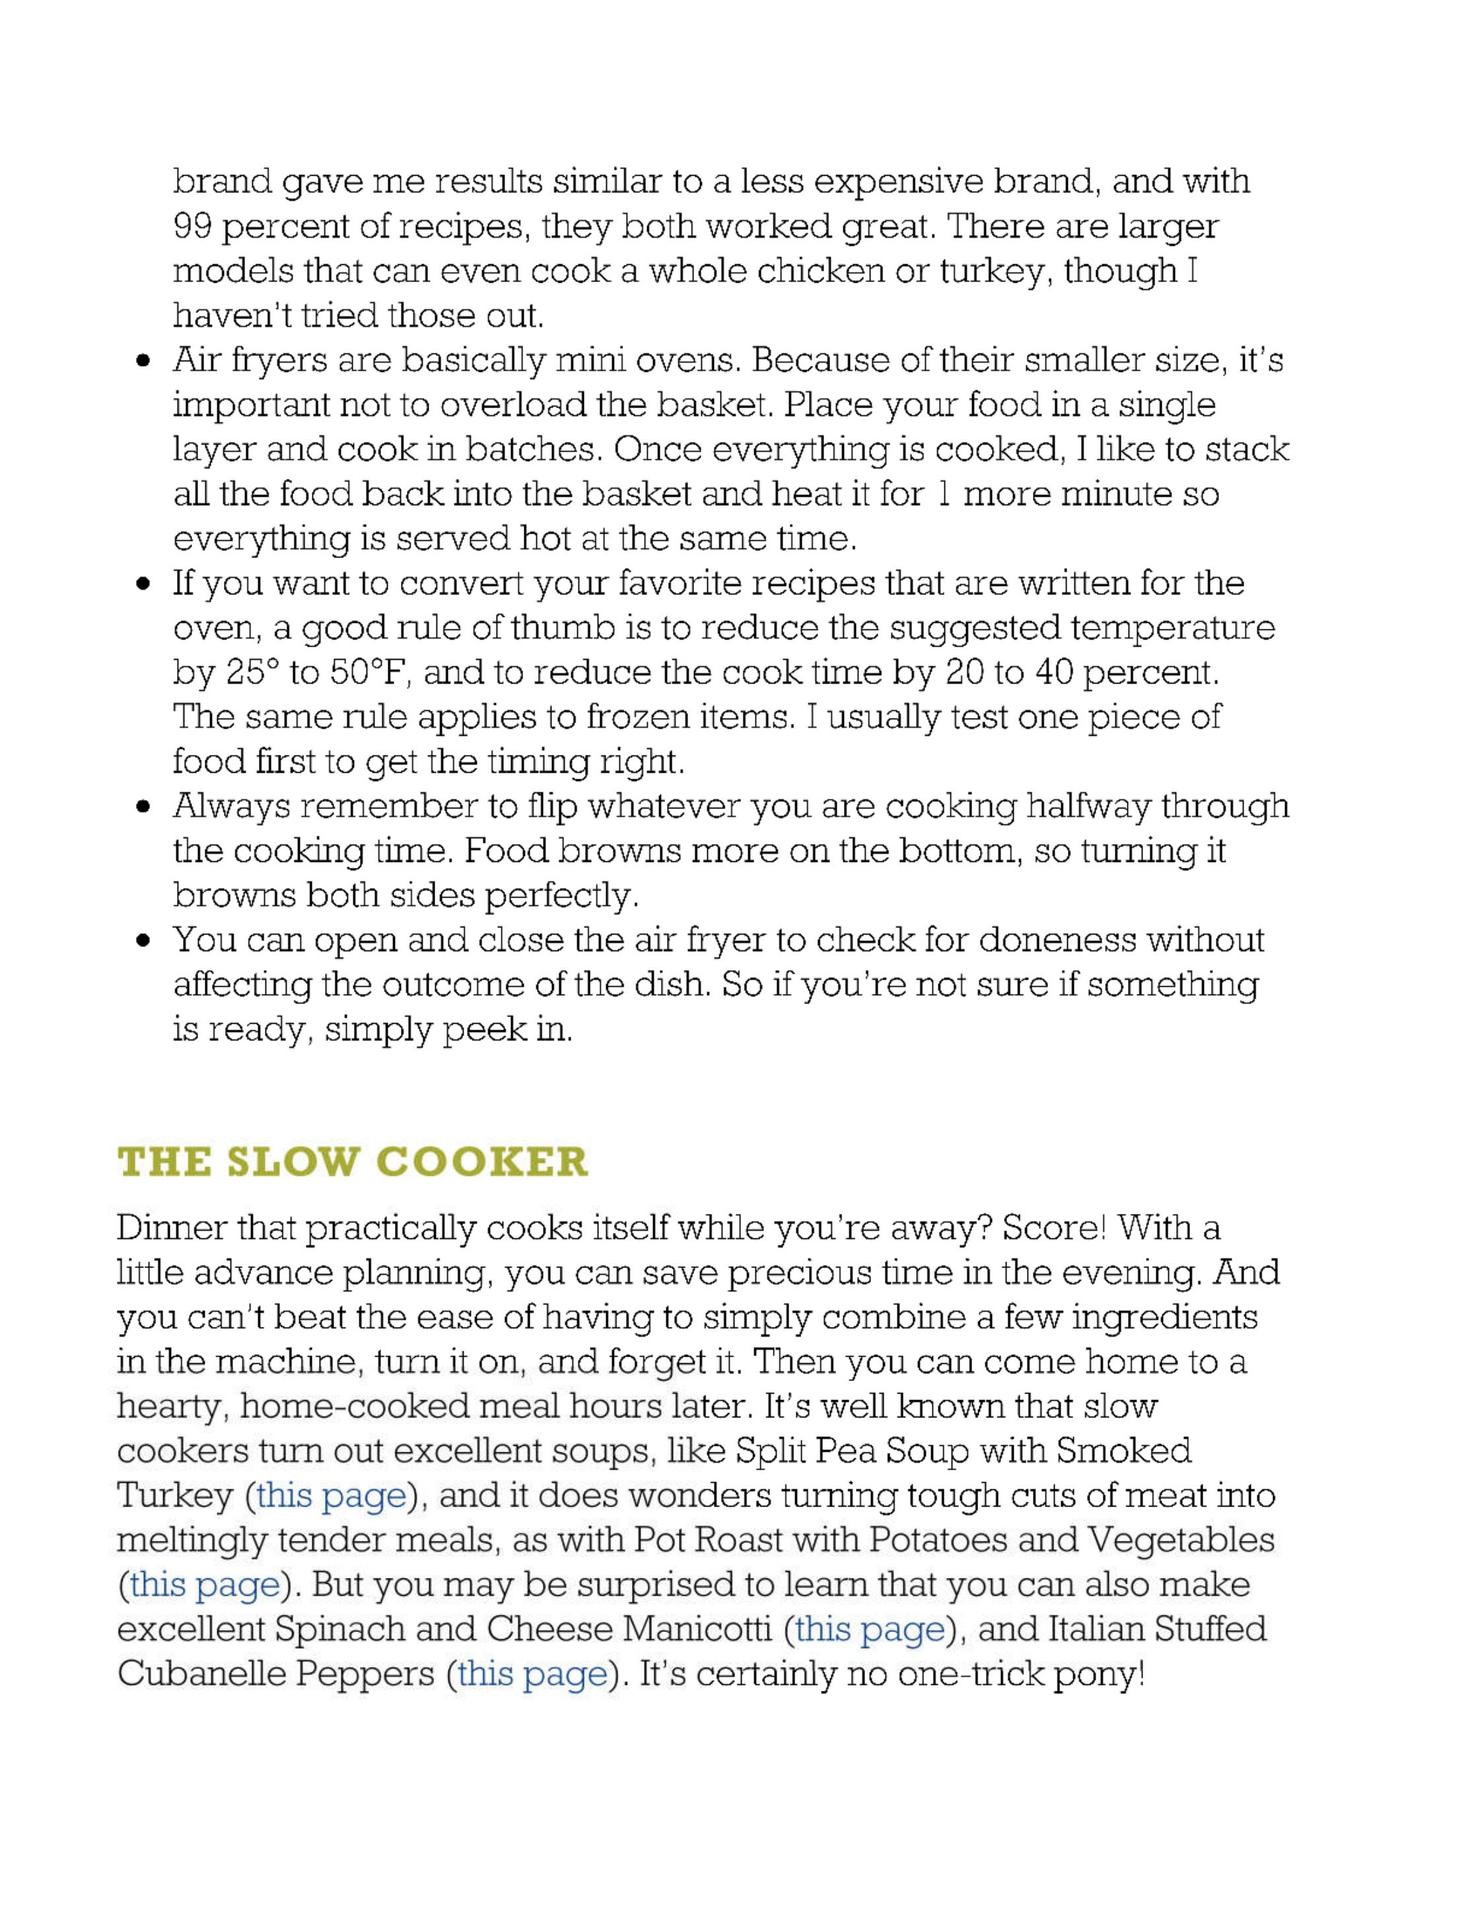 The 2022 Healthy Food Cookbook - 100 No-Fuss Dinner 140 Healthy and delicious recipes that are big on flavor and low on calories and cleanup - photo 20